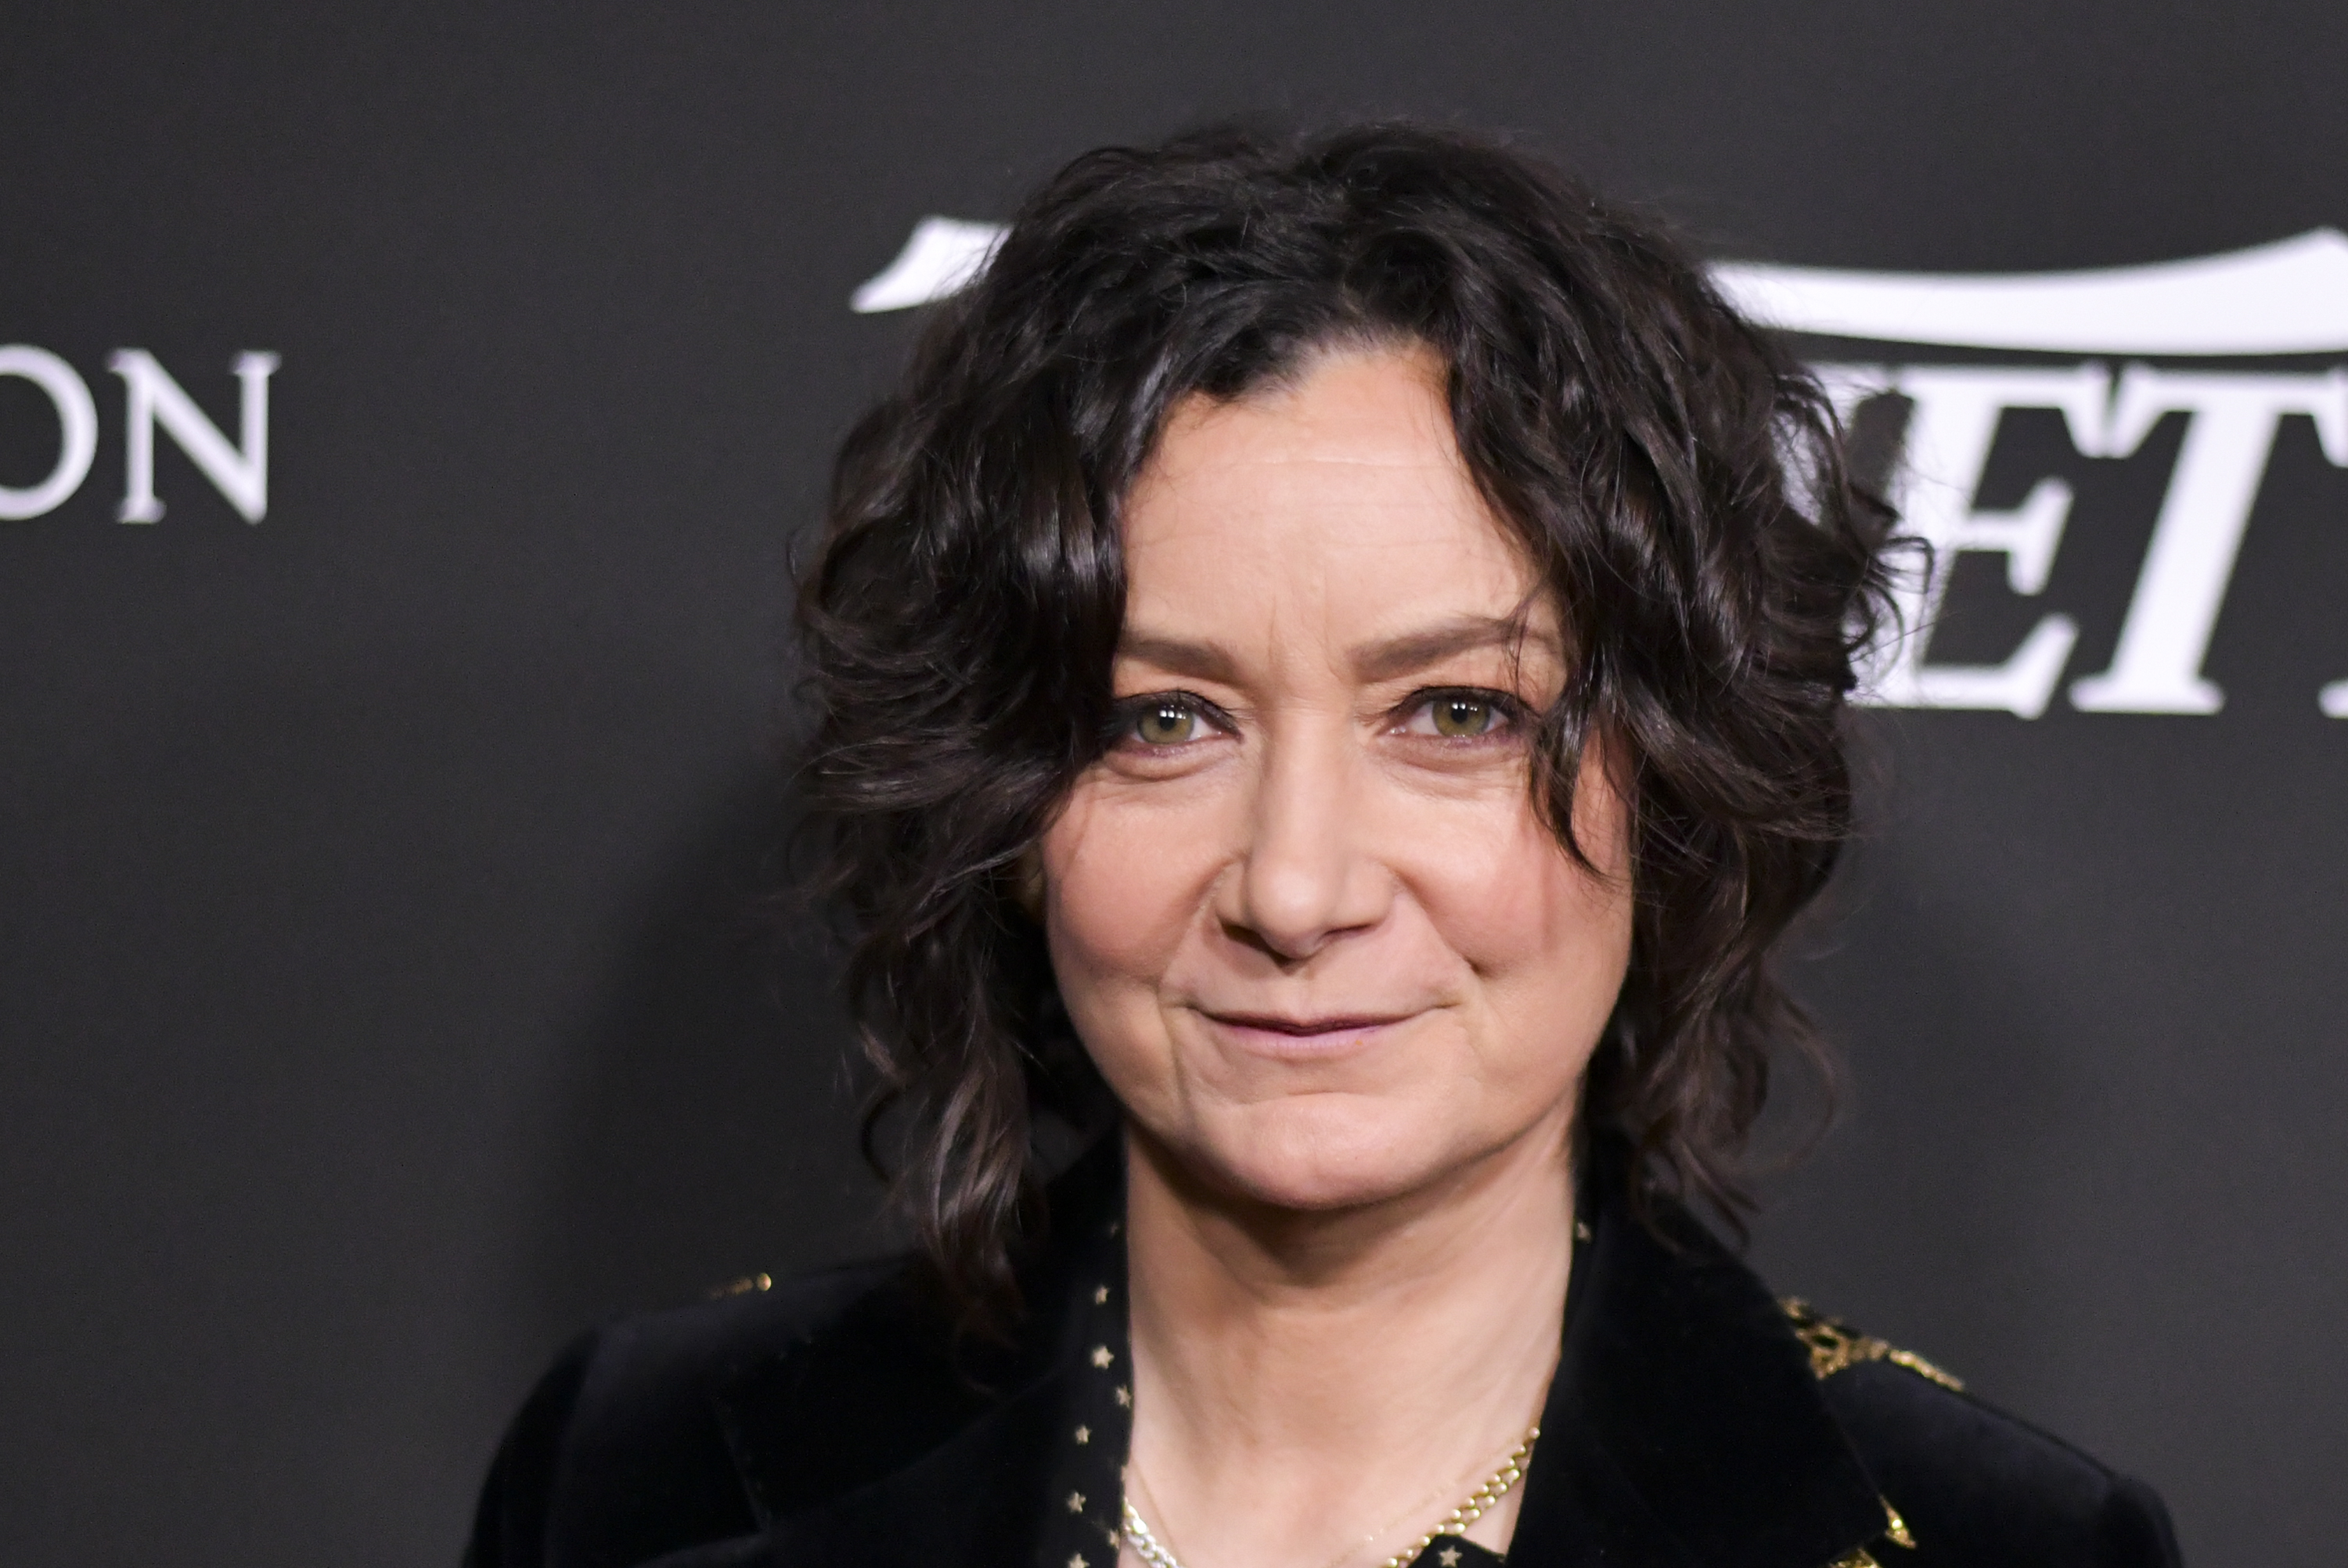 Sara Gilbert attends Sean Penn, Bryan Lourd, and Vivi Nevo Host 10th Anniversary Gala Benefiting CORE at Wiltern Theater on January 15, 2020, in Los Angeles, California. | Source: Getty Images